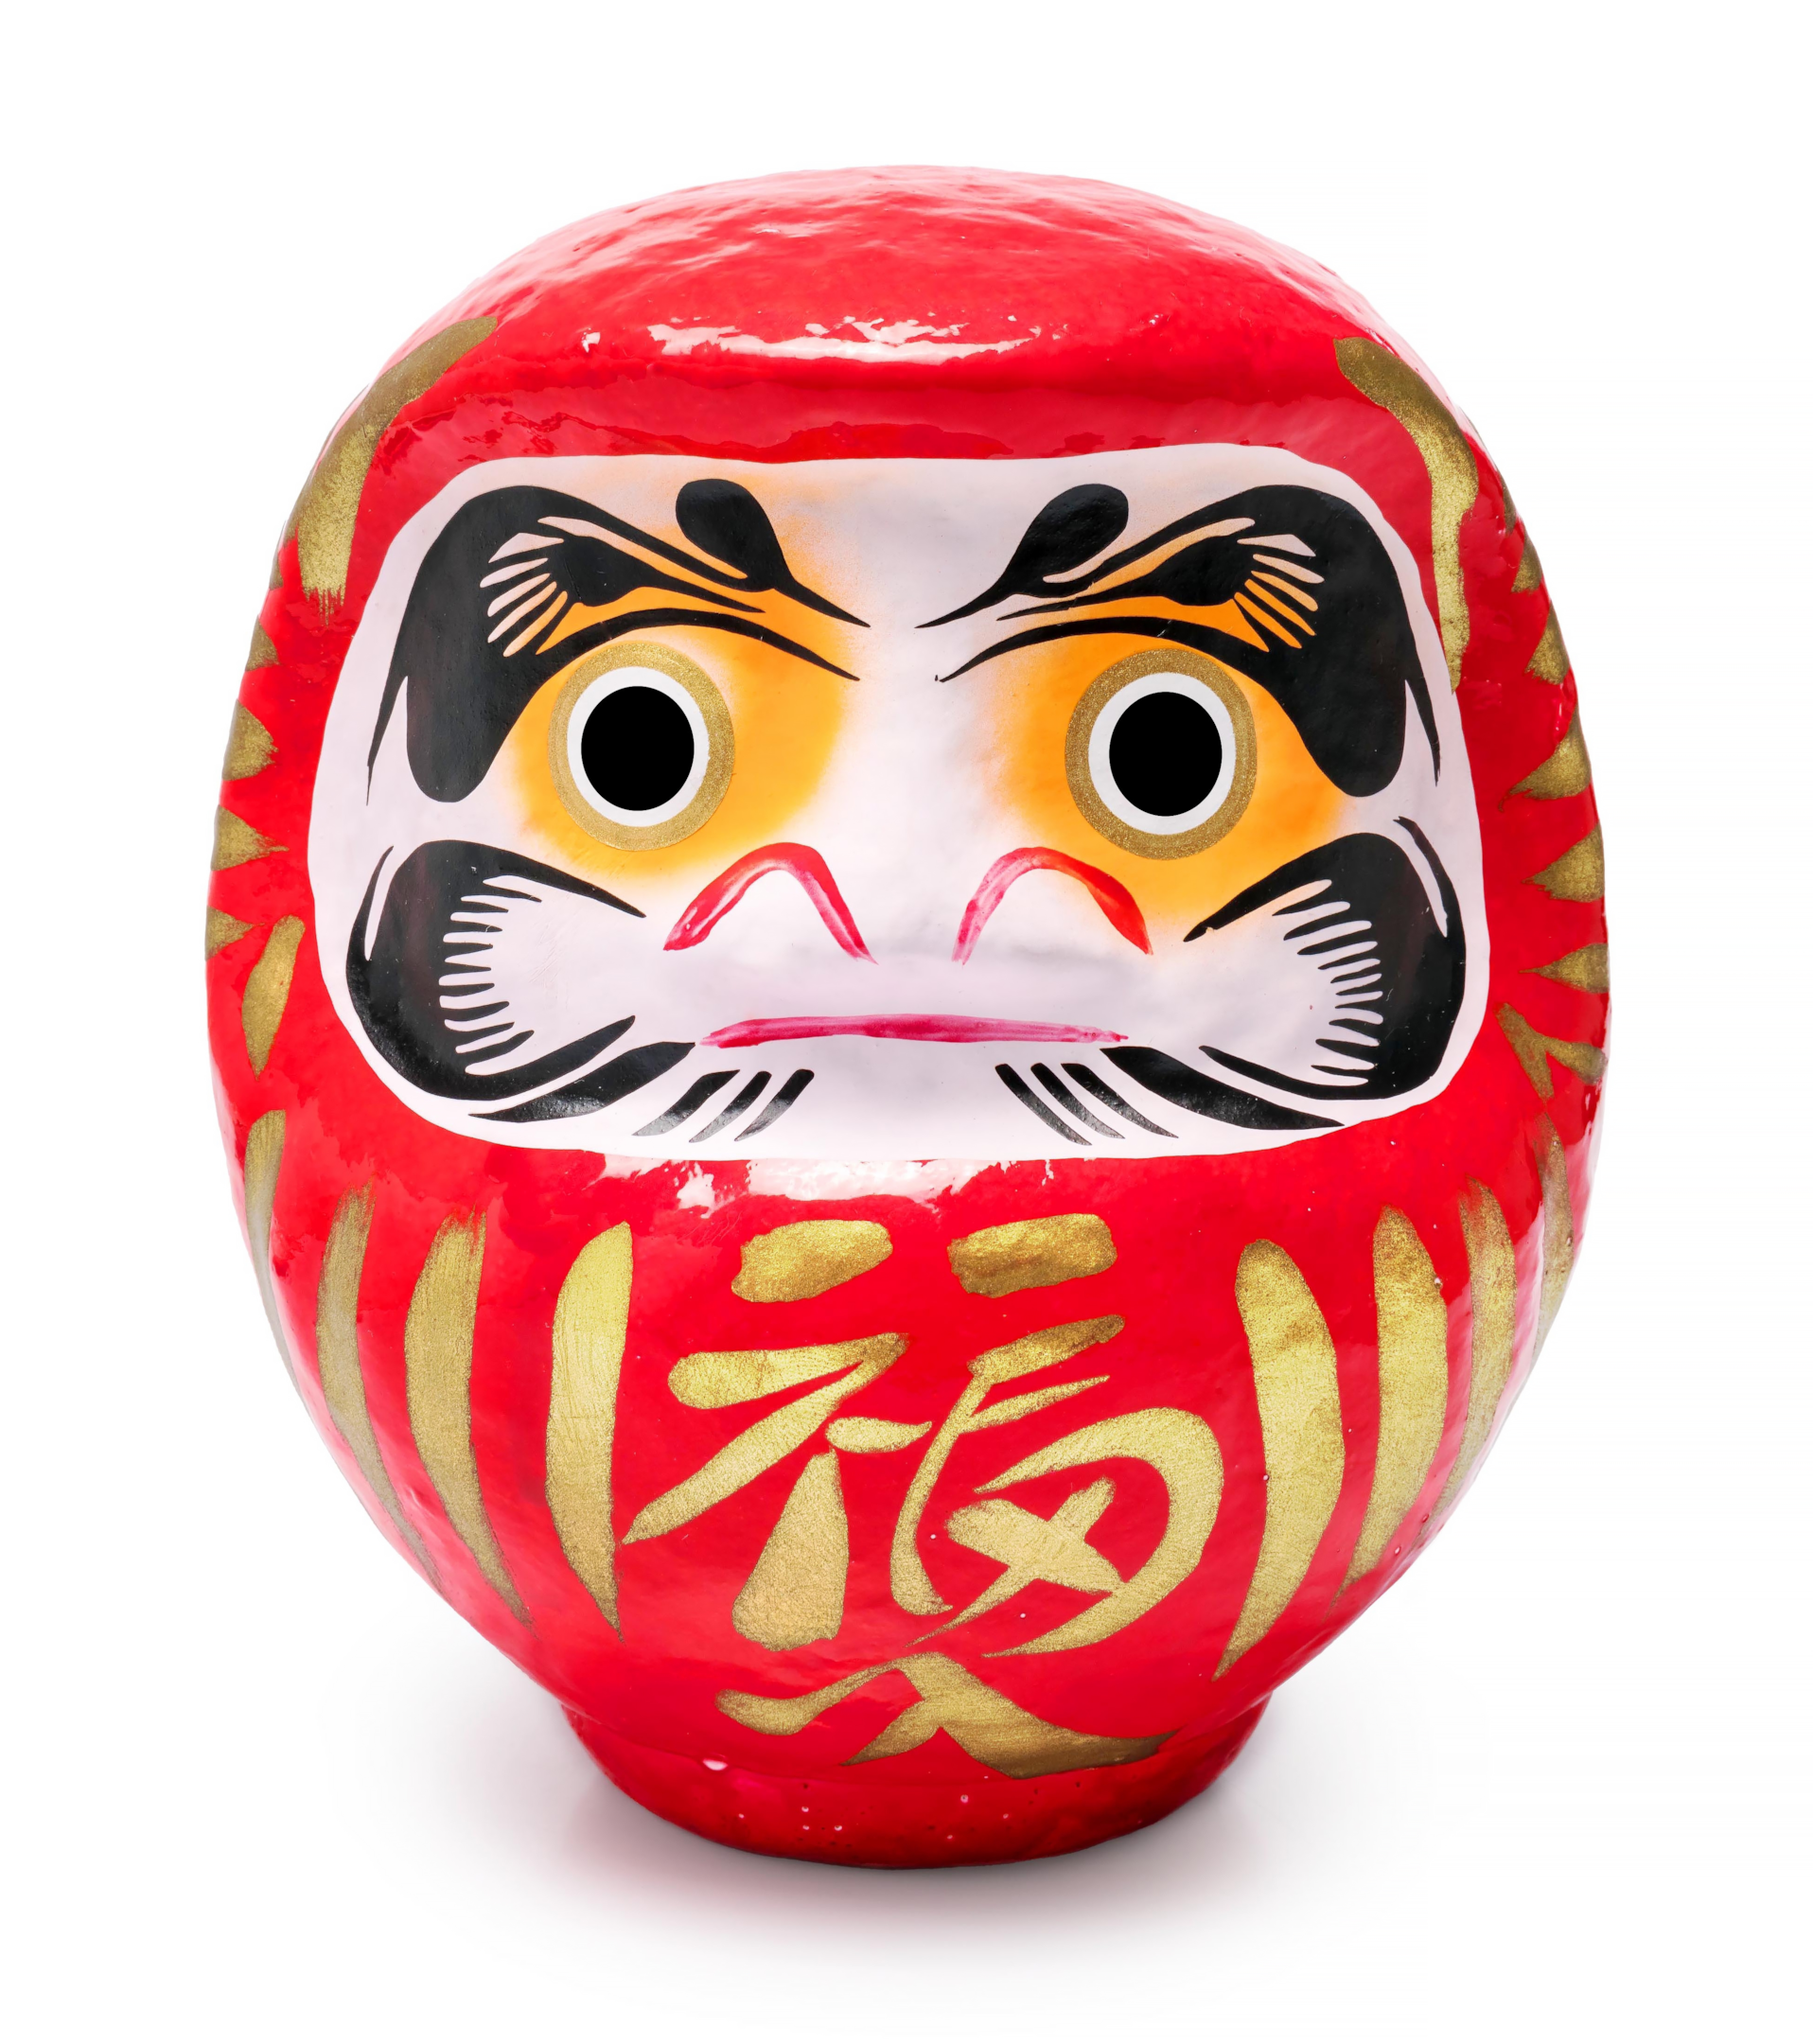 Red daruma with both eyes painted